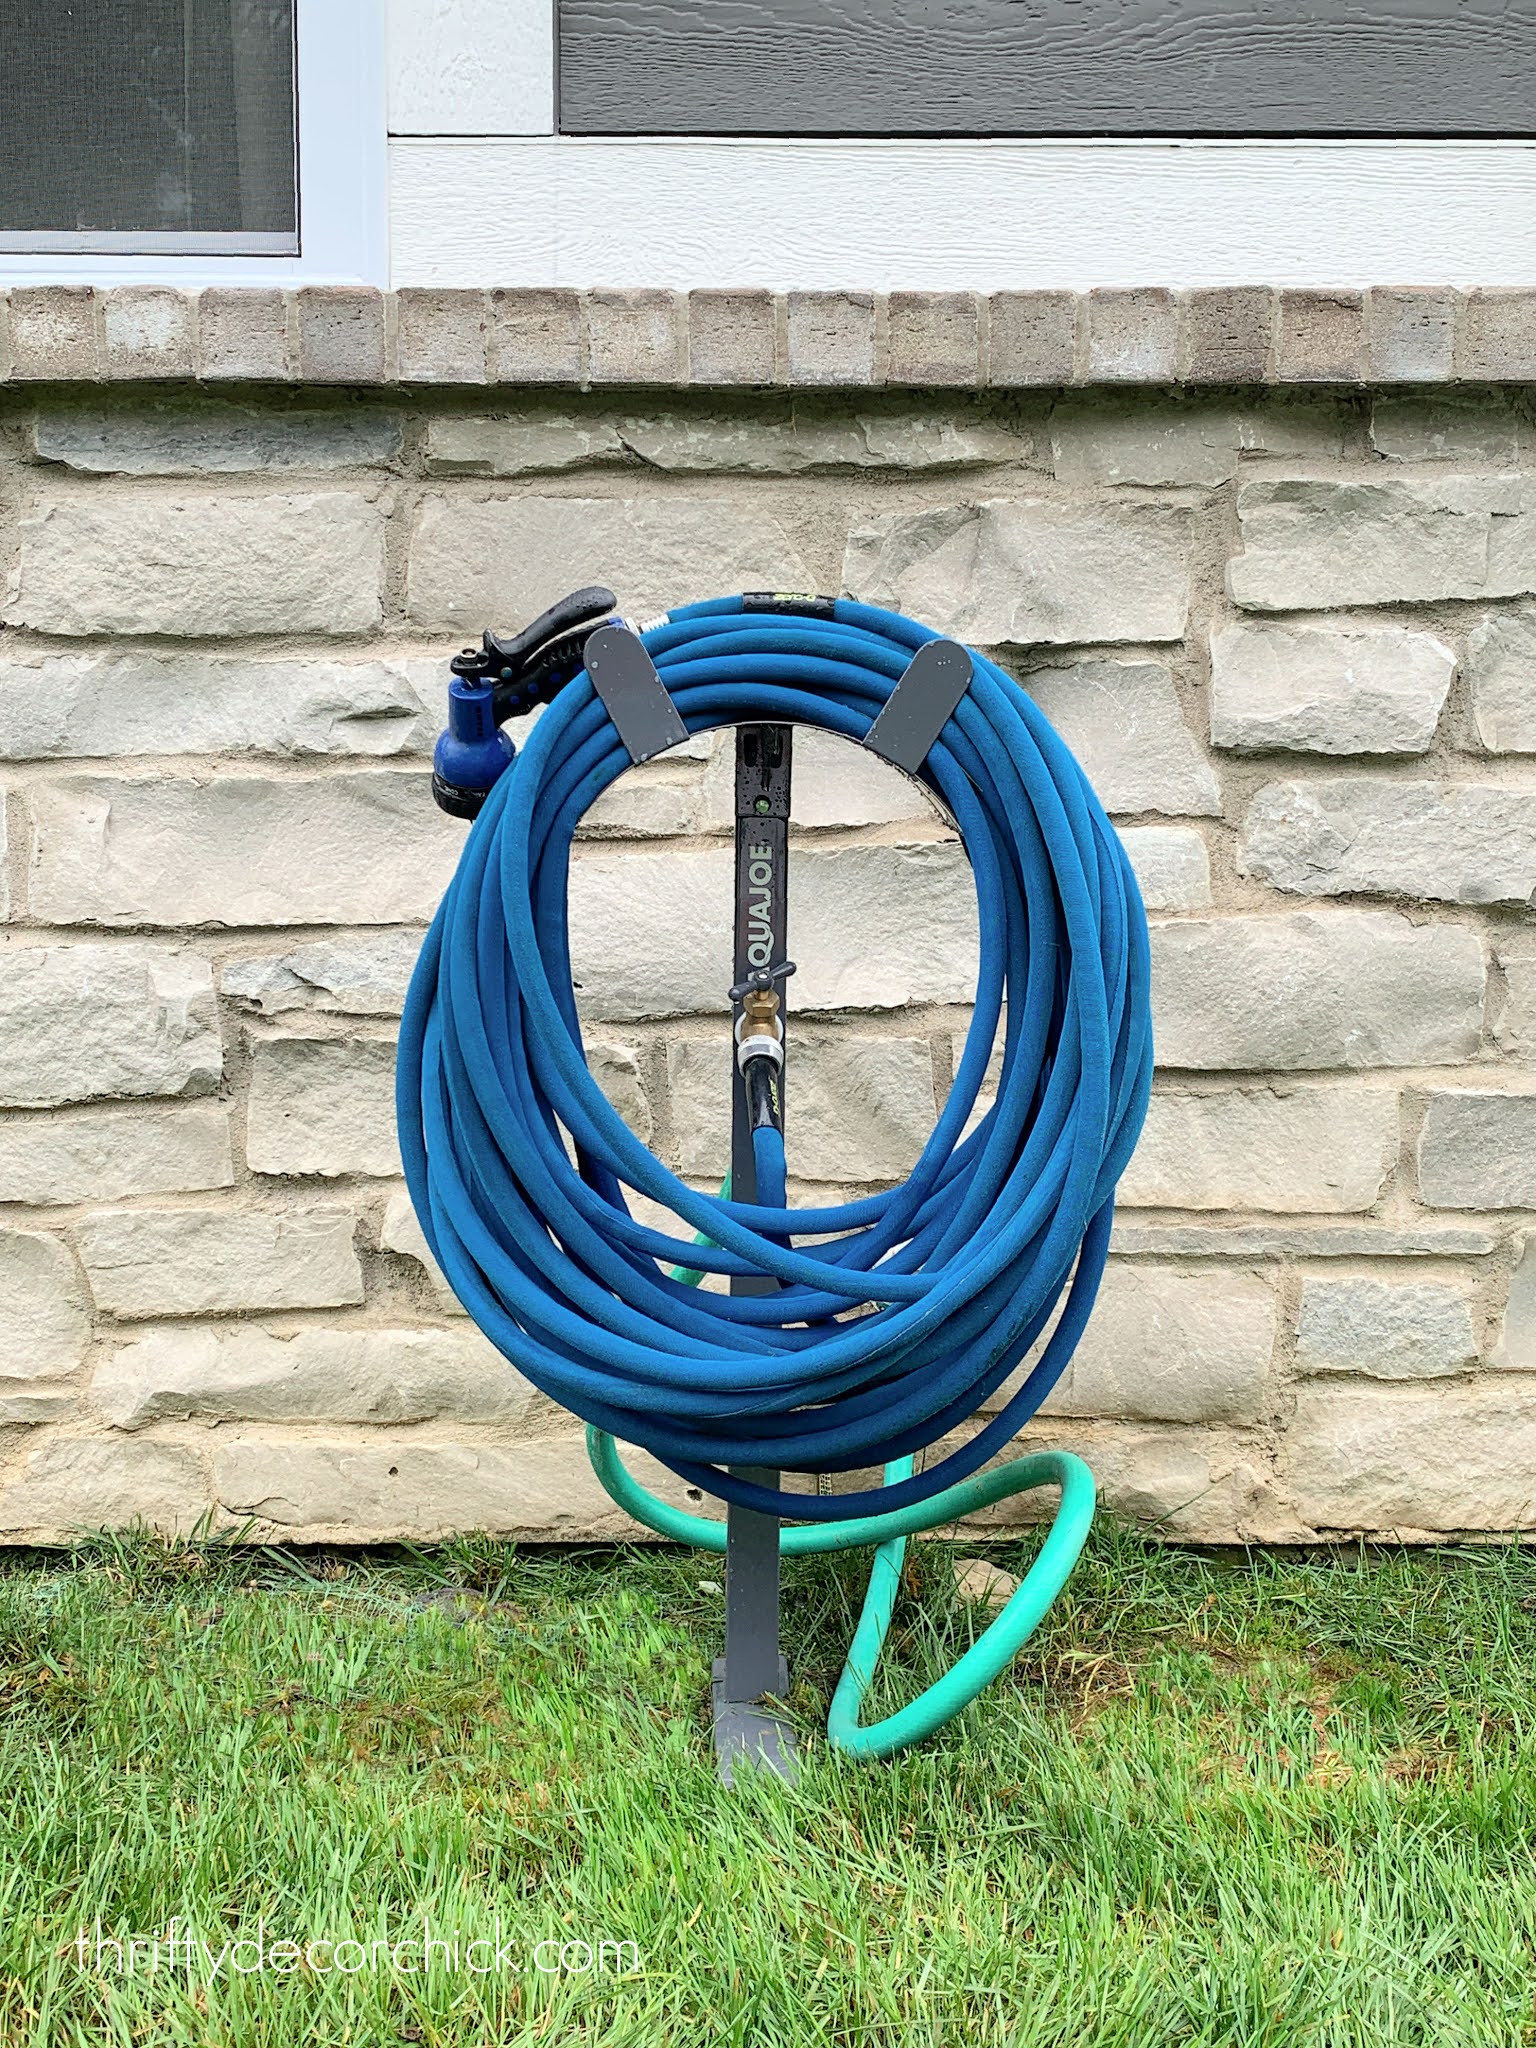 Hose Reel solution for yard and garden,outdoor faucet extension